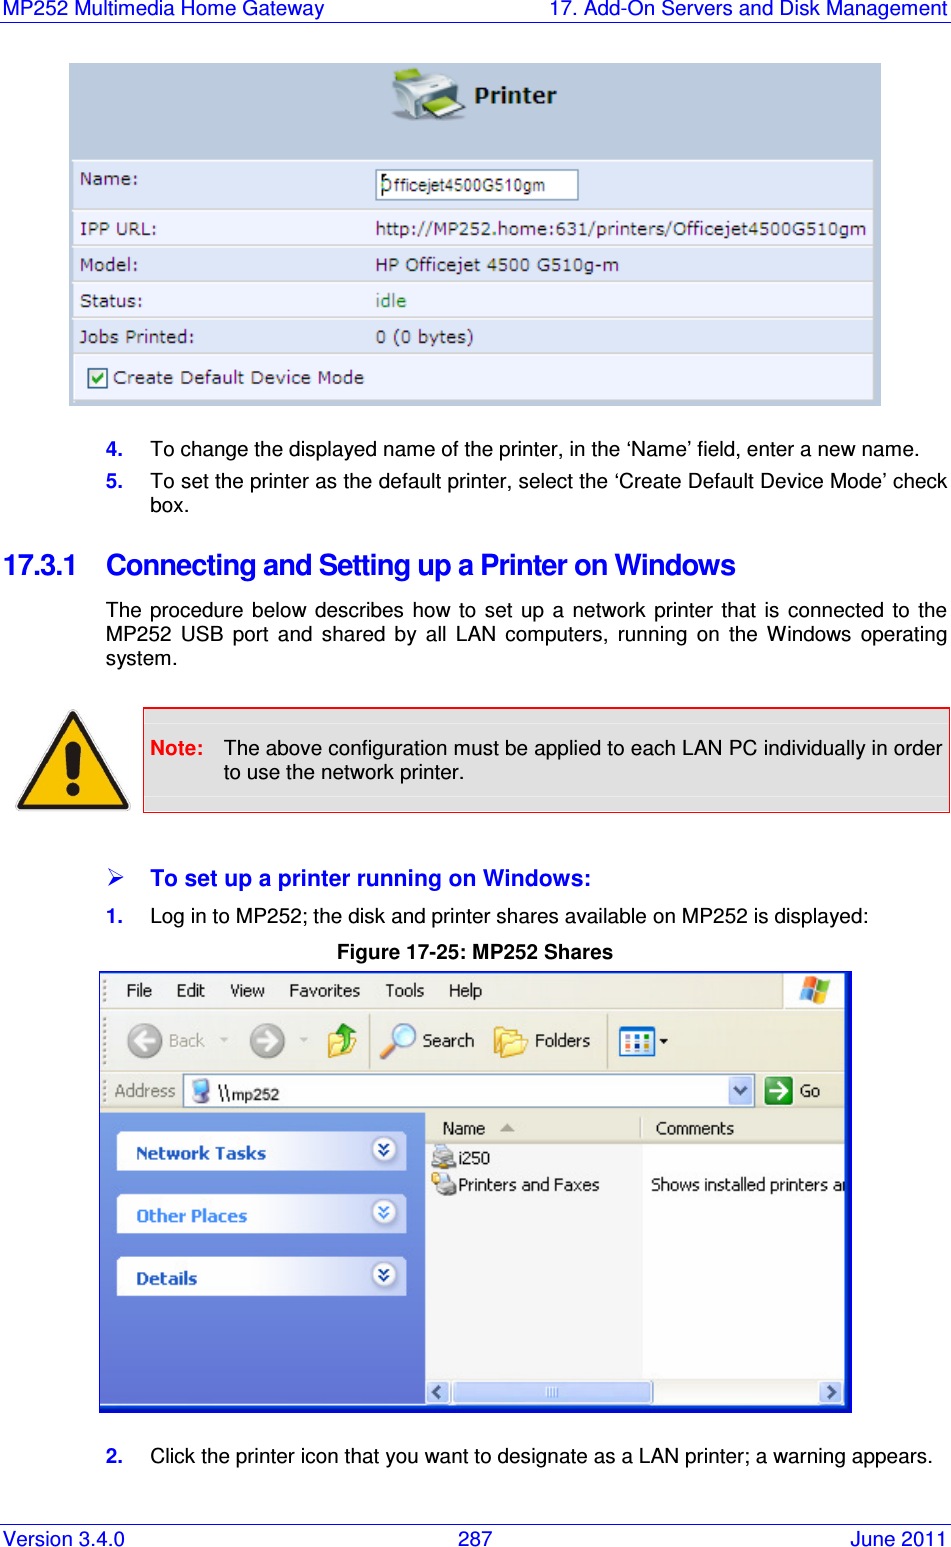 MP252 Multimedia Home Gateway  17. Add-On Servers and Disk Management Version 3.4.0  287  June 2011  4.  To change the displayed name of the printer, in the ‘Name’ field, enter a new name.  5.  To set the printer as the default printer, select the ‘Create Default Device Mode’ check box.  17.3.1  Connecting and Setting up a Printer on Windows  The  procedure  below  describes  how to  set up a  network  printer  that is  connected  to  the MP252  USB  port  and  shared  by  all  LAN  computers,  running  on  the  Windows  operating system.   Note:  The above configuration must be applied to each LAN PC individually in order to use the network printer.   To set up a printer running on Windows:  1.  Log in to MP252; the disk and printer shares available on MP252 is displayed: Figure 17-25: MP252 Shares  2.  Click the printer icon that you want to designate as a LAN printer; a warning appears. 